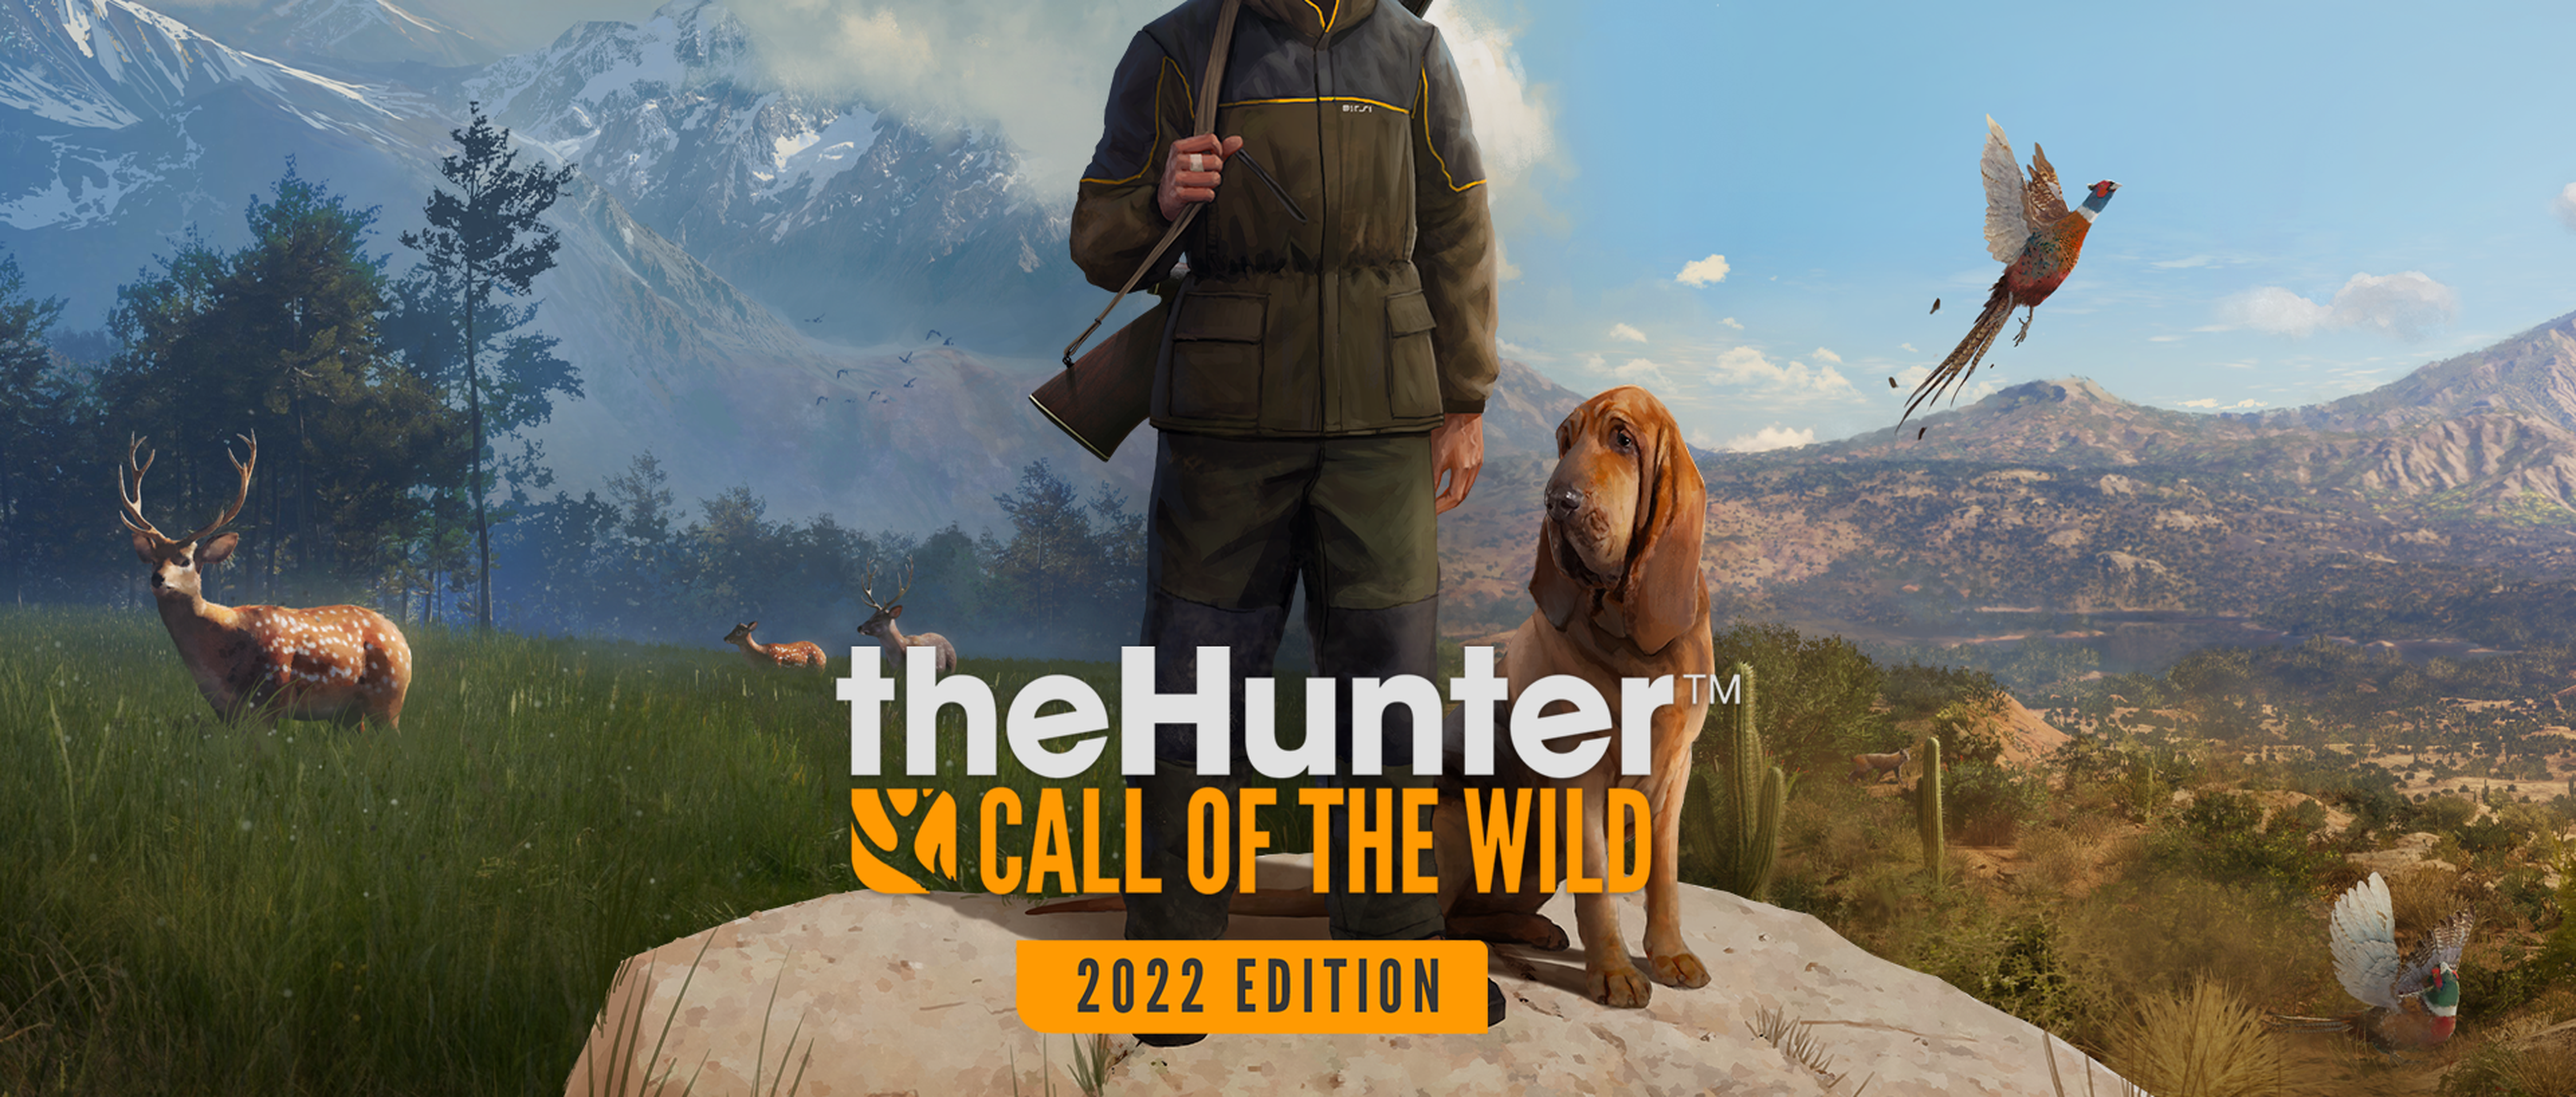 the hunter call of the wild xbox one tips